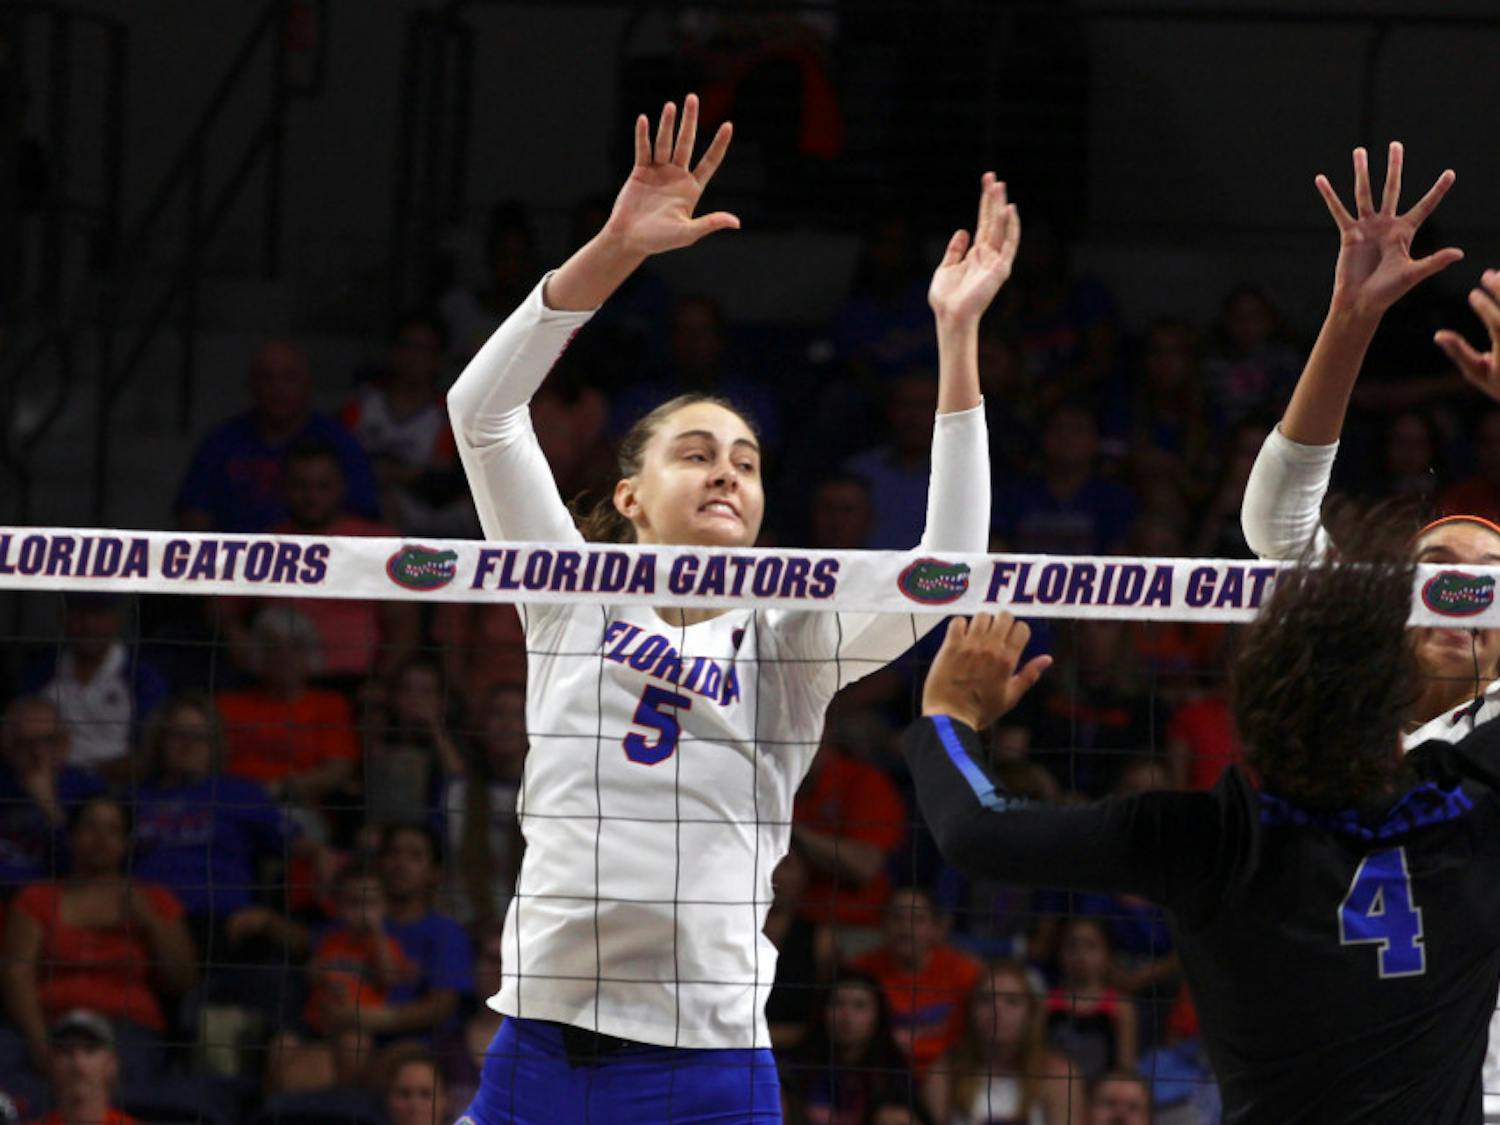 Rachael Kramer goes up for a block during Florida's 3-1 loss to Kentucky on Oct. 15, 2017, at the O'Connell Center. Kramer recorded 11 kills in a win against Mississippi State on Sunday.